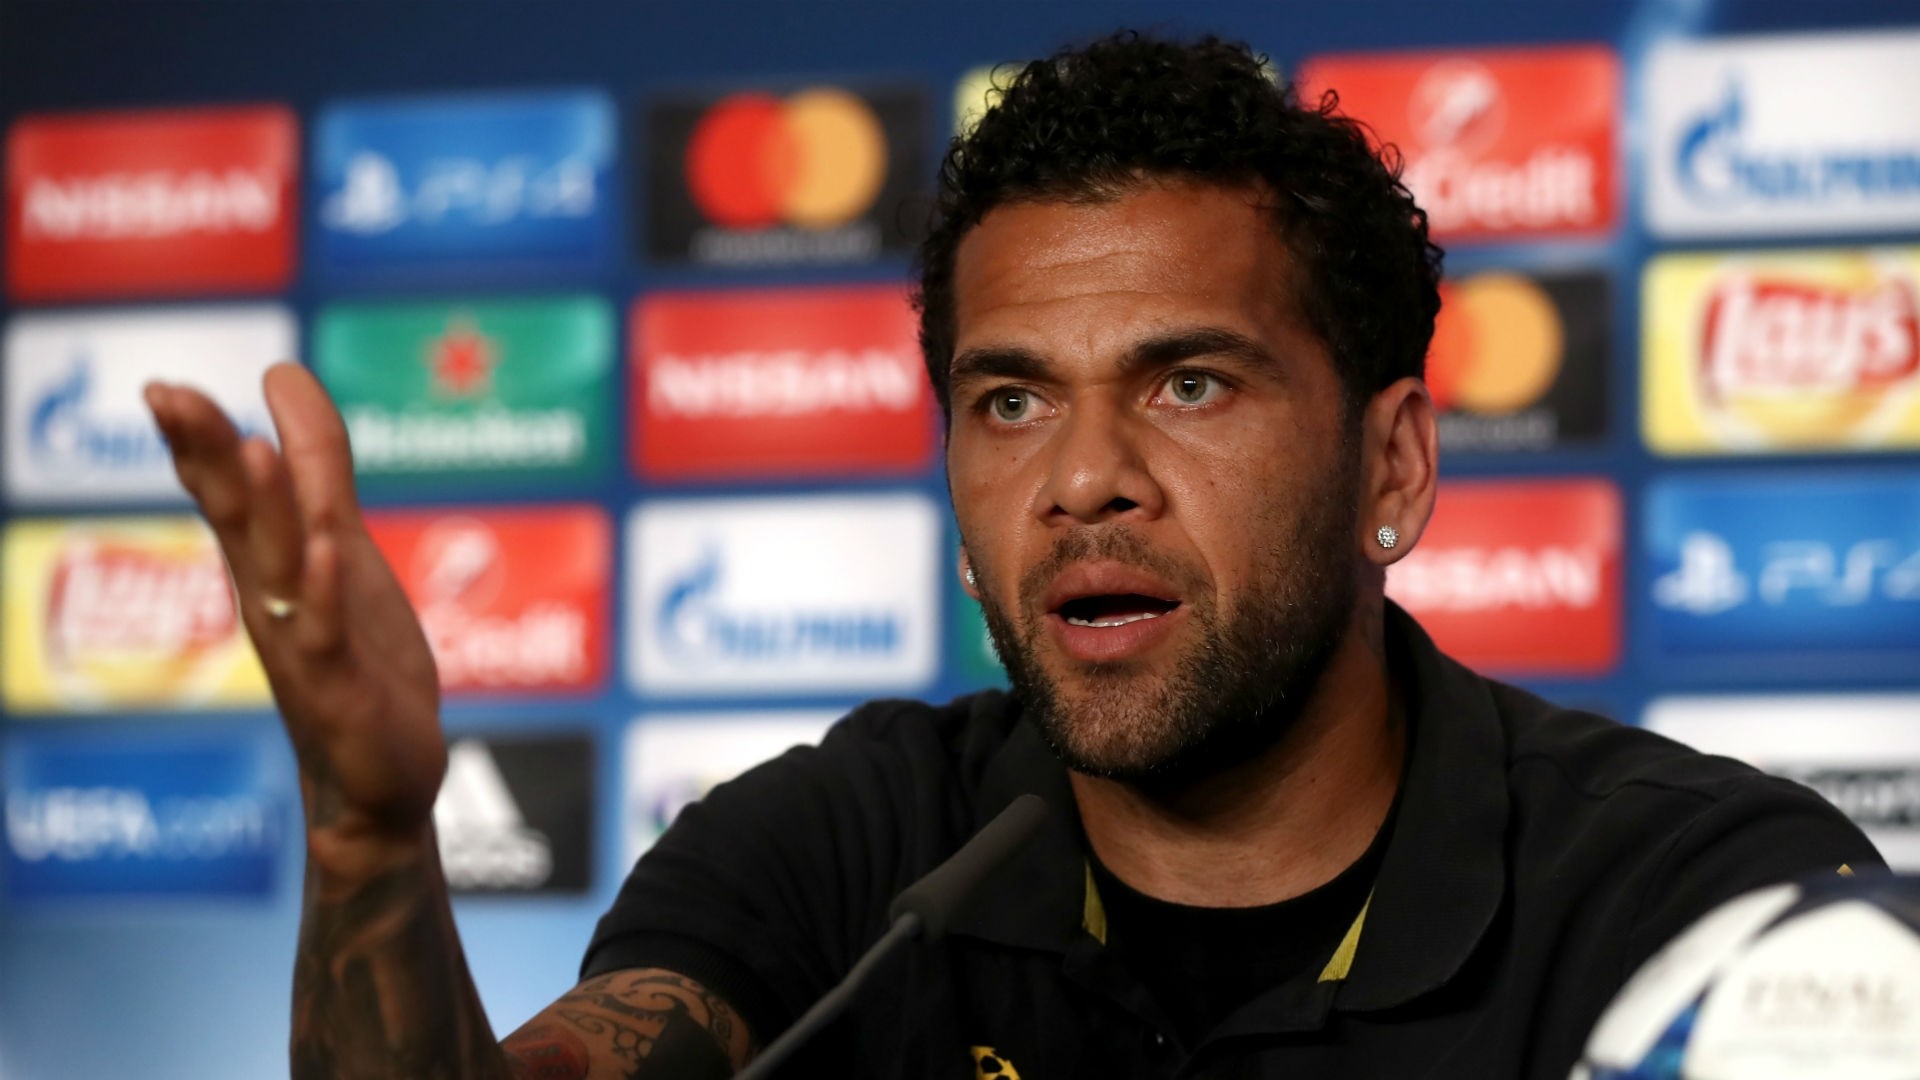 1920x1080 Daniel Alves insisted in the statement that he does not "play for money".